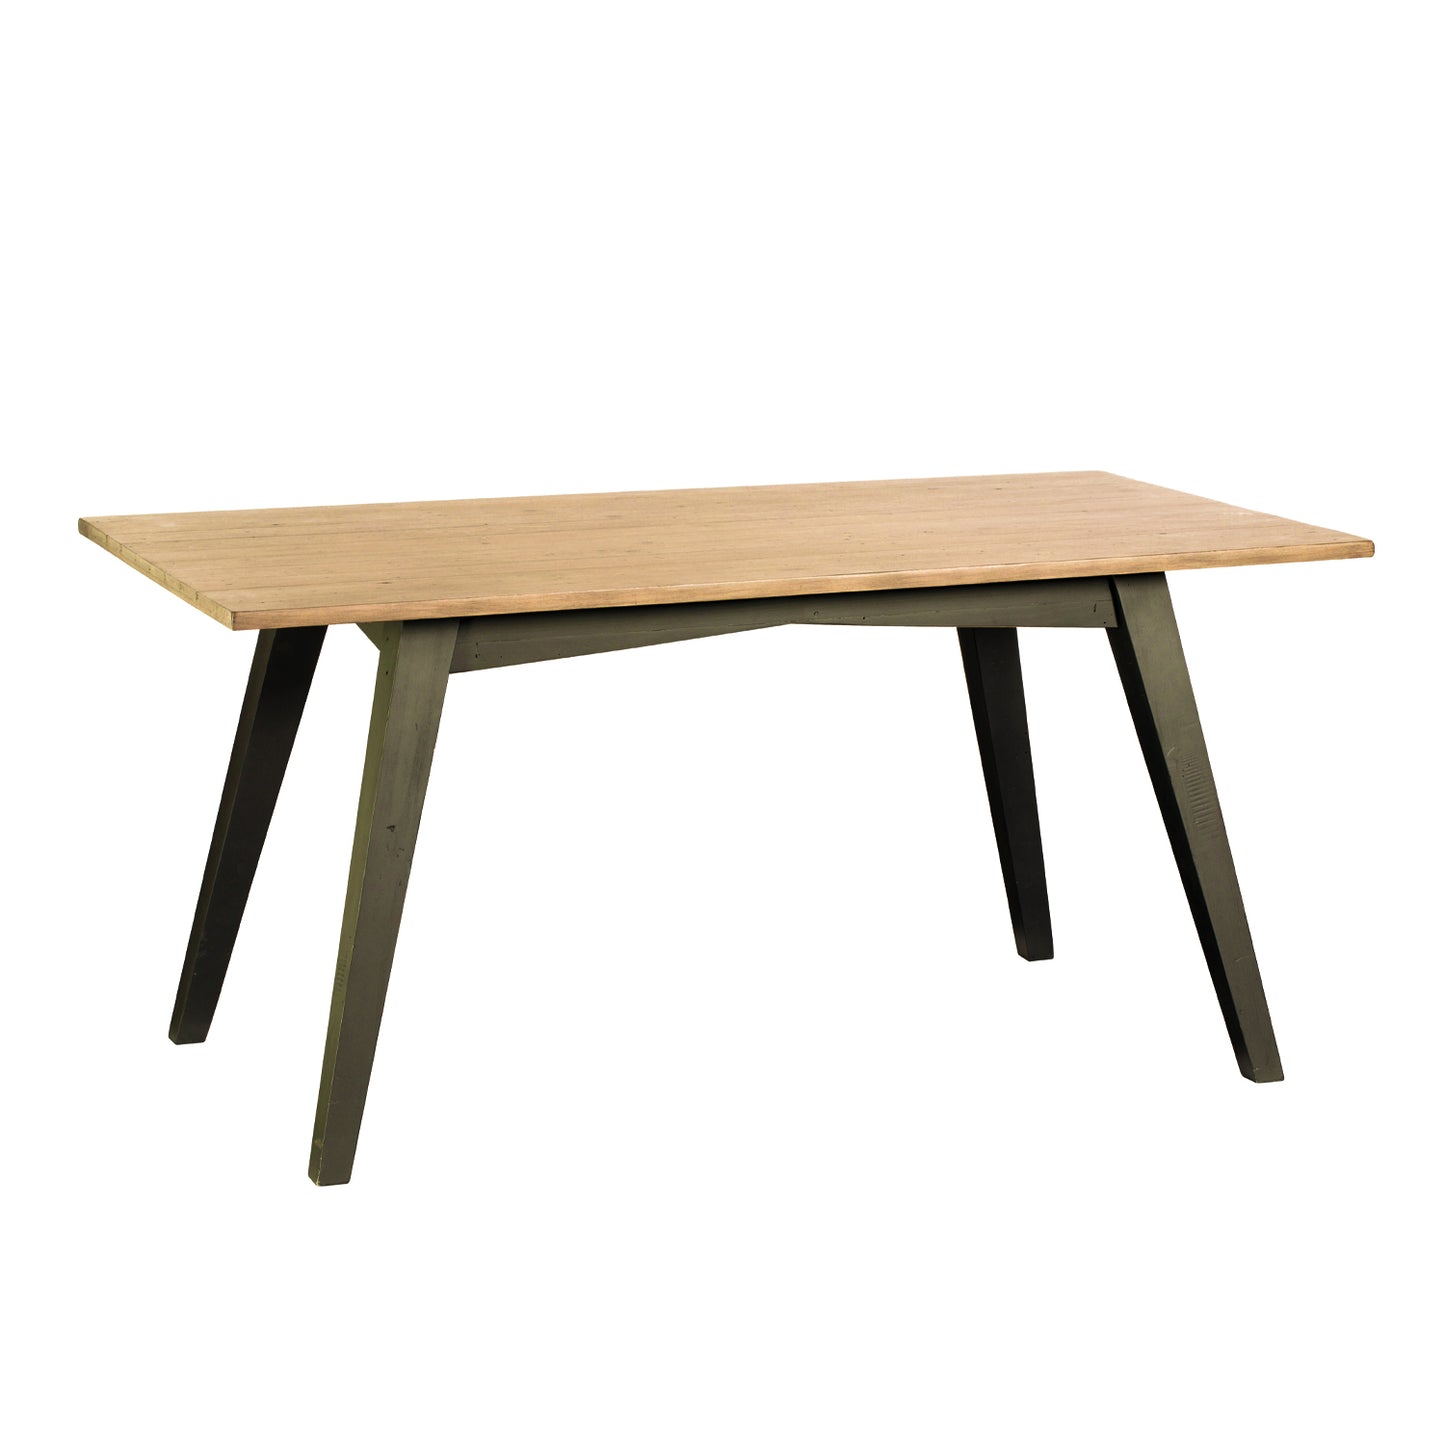 Lawrence Hill Dining Table - 160cm